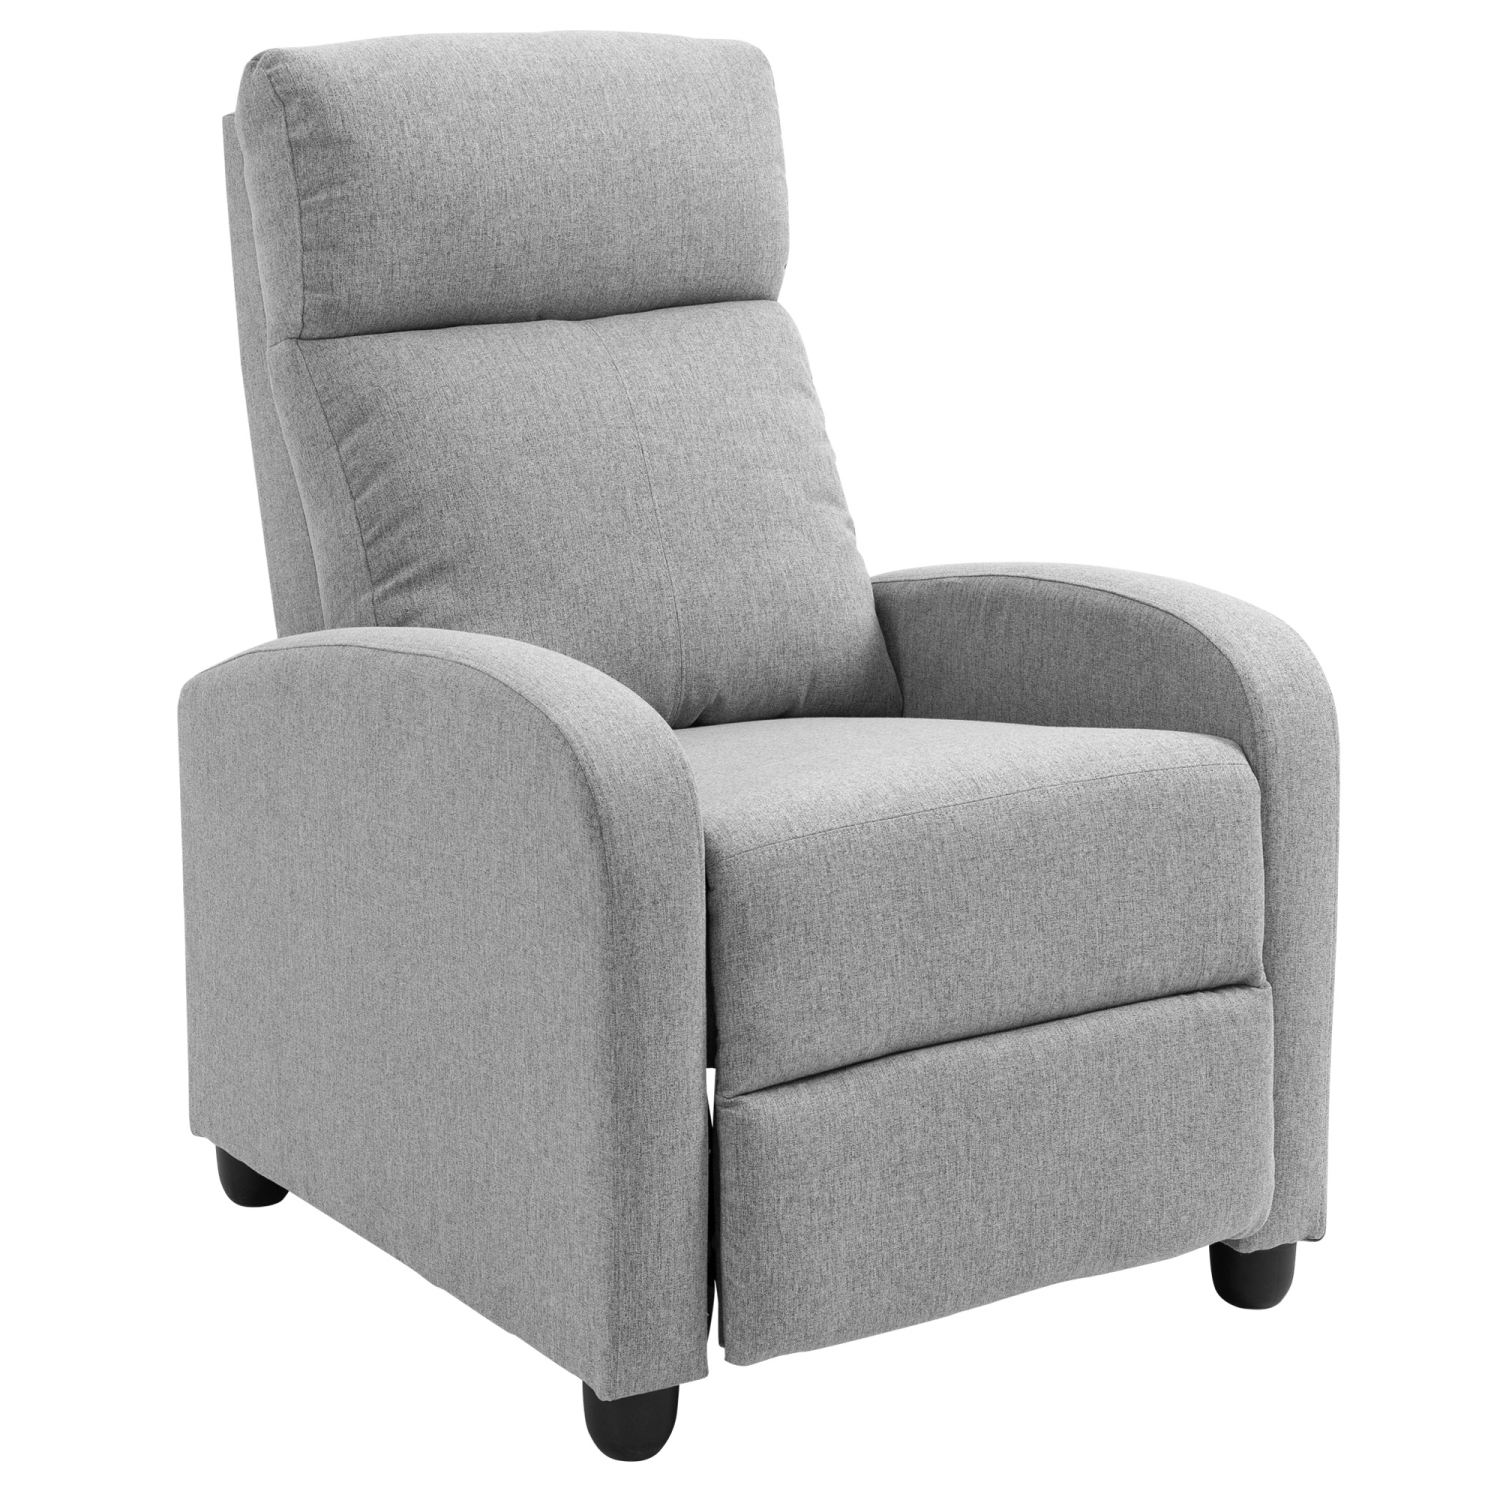 HOMCOM Push Back Recliner Chair, Fabric Home Theater Seating, Single Reclining Sofa Chair with Padded Seat for Living Room, Light Grey